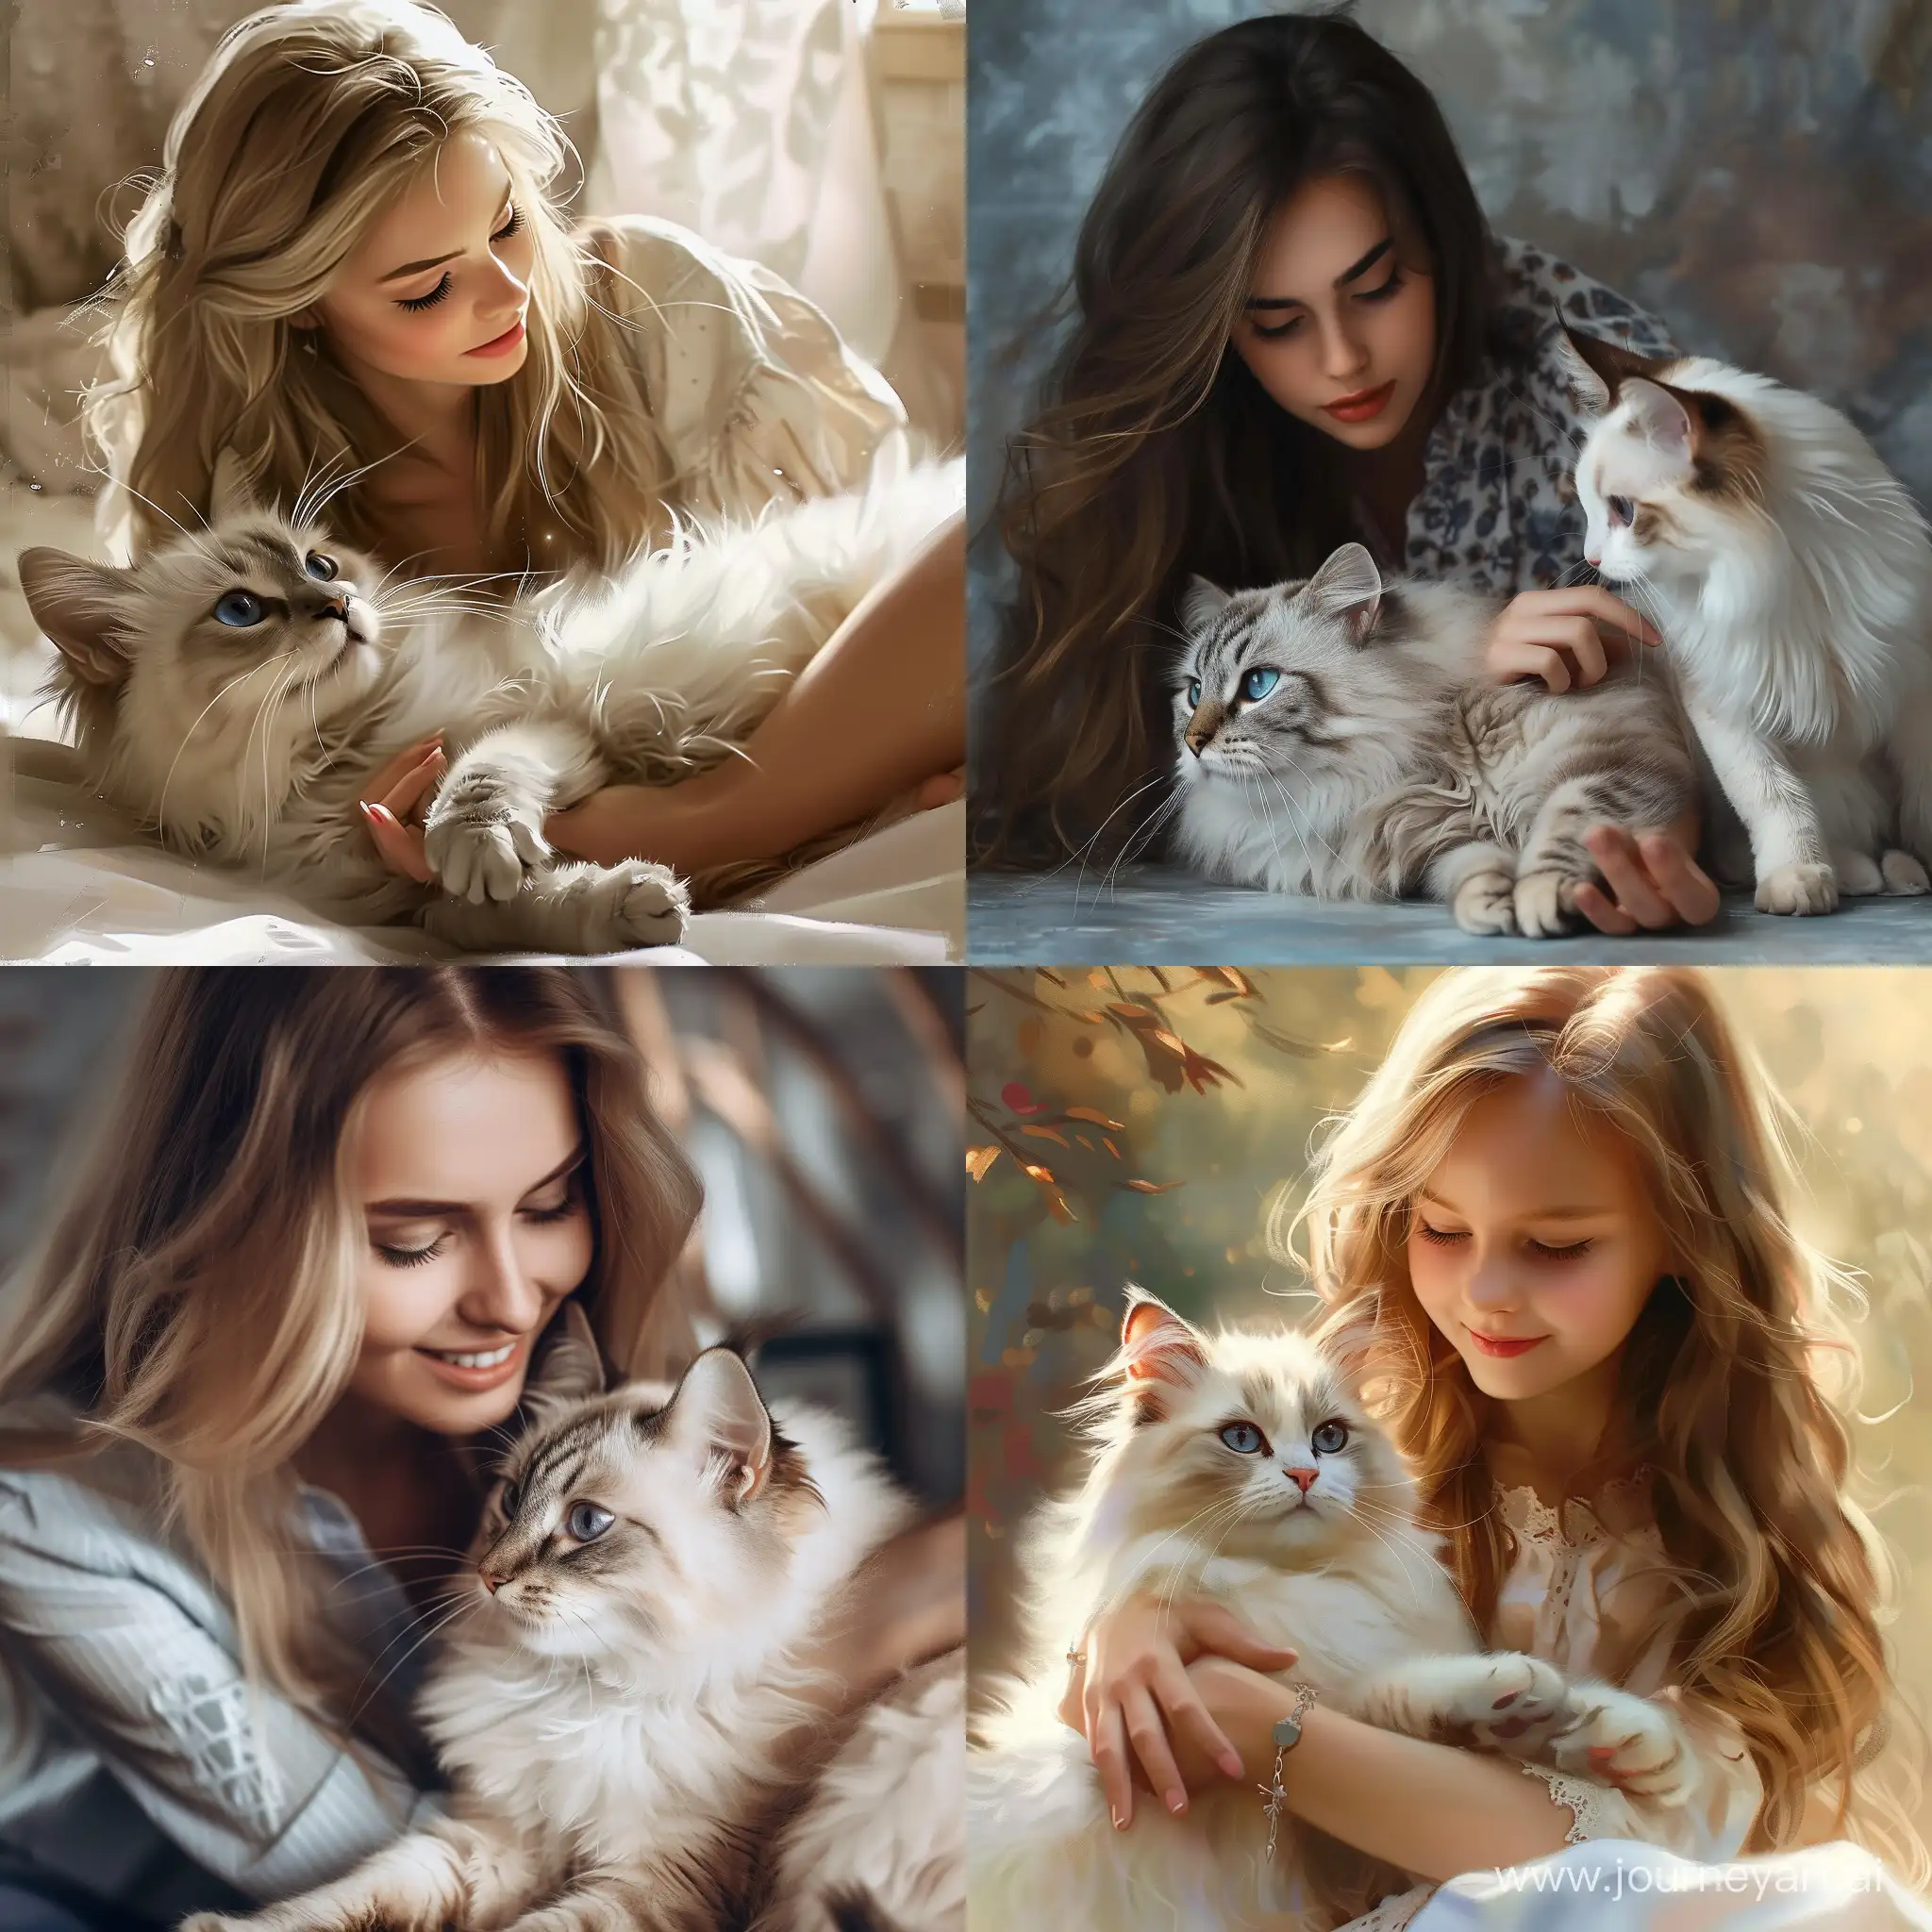 Adorable-Teen-Girl-Playing-with-Ragdoll-Cat